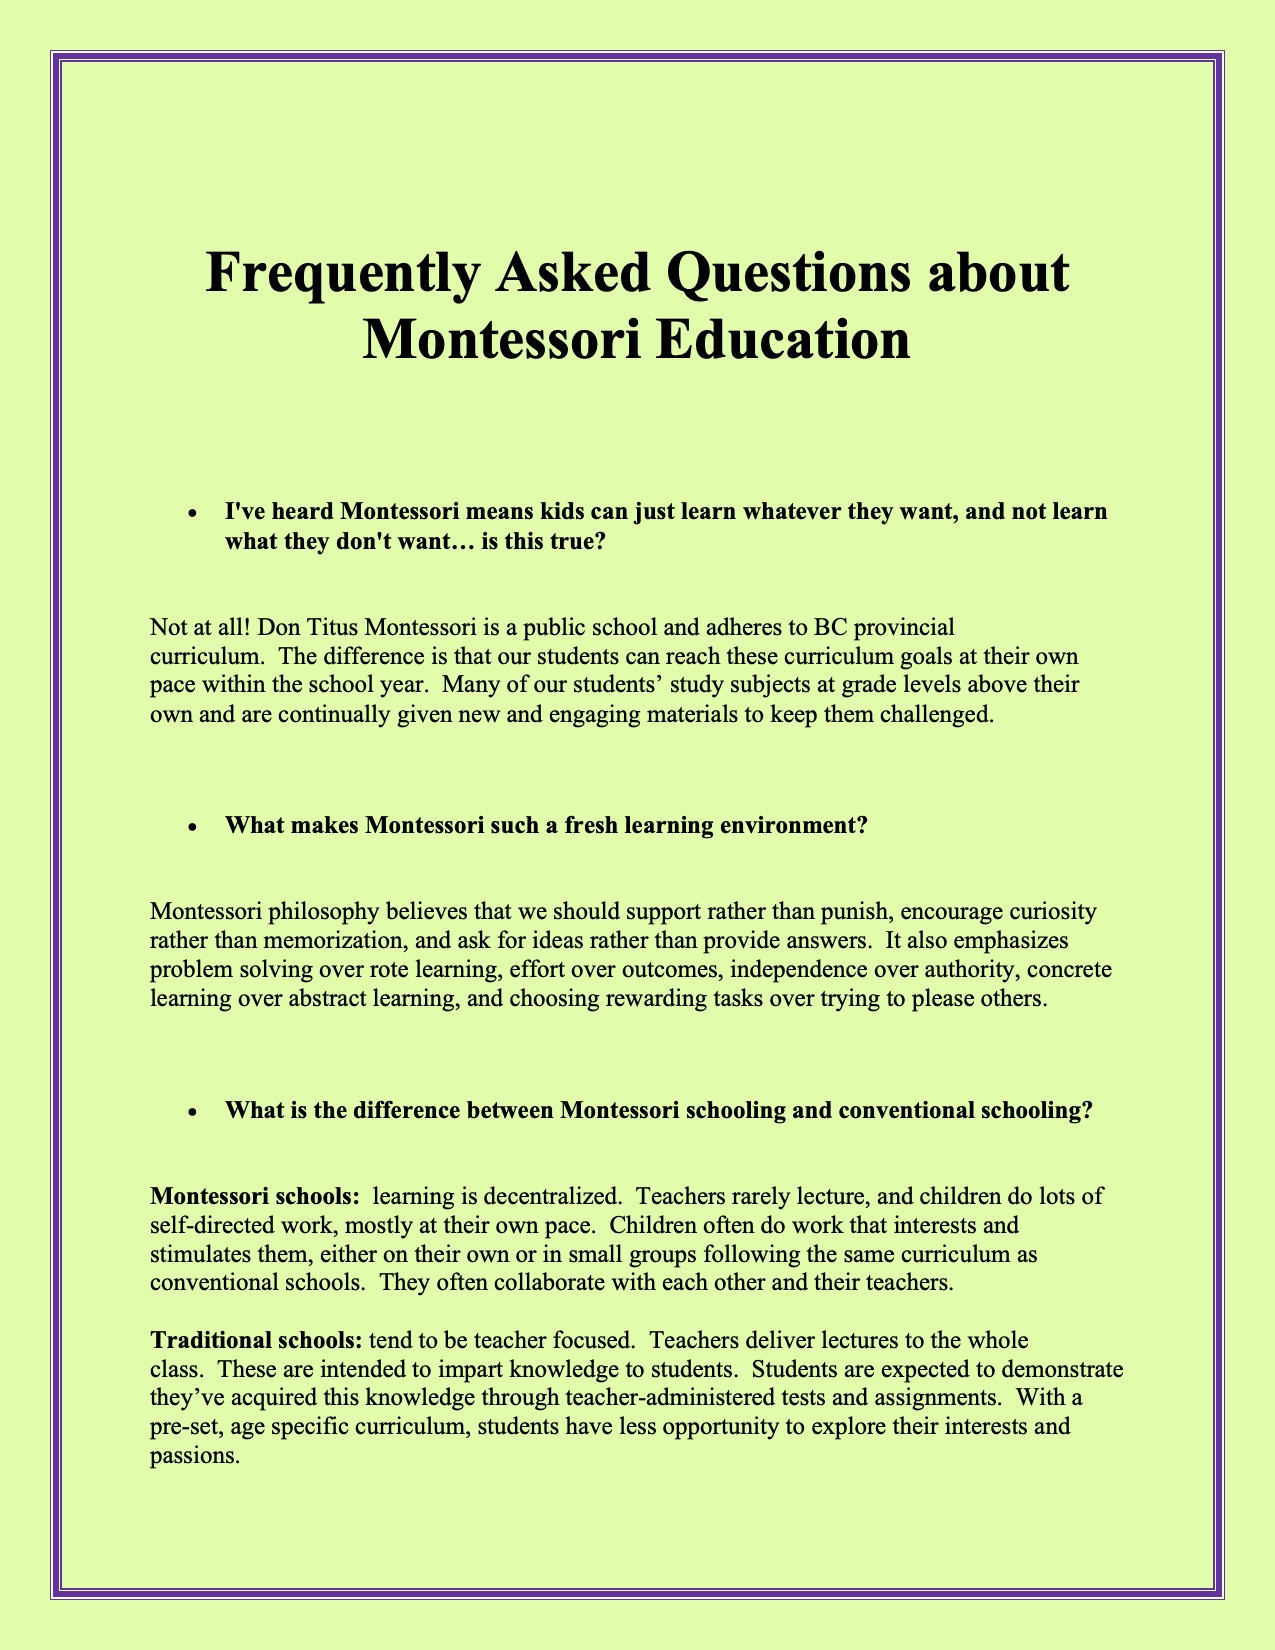 Frequently asked questions pg1